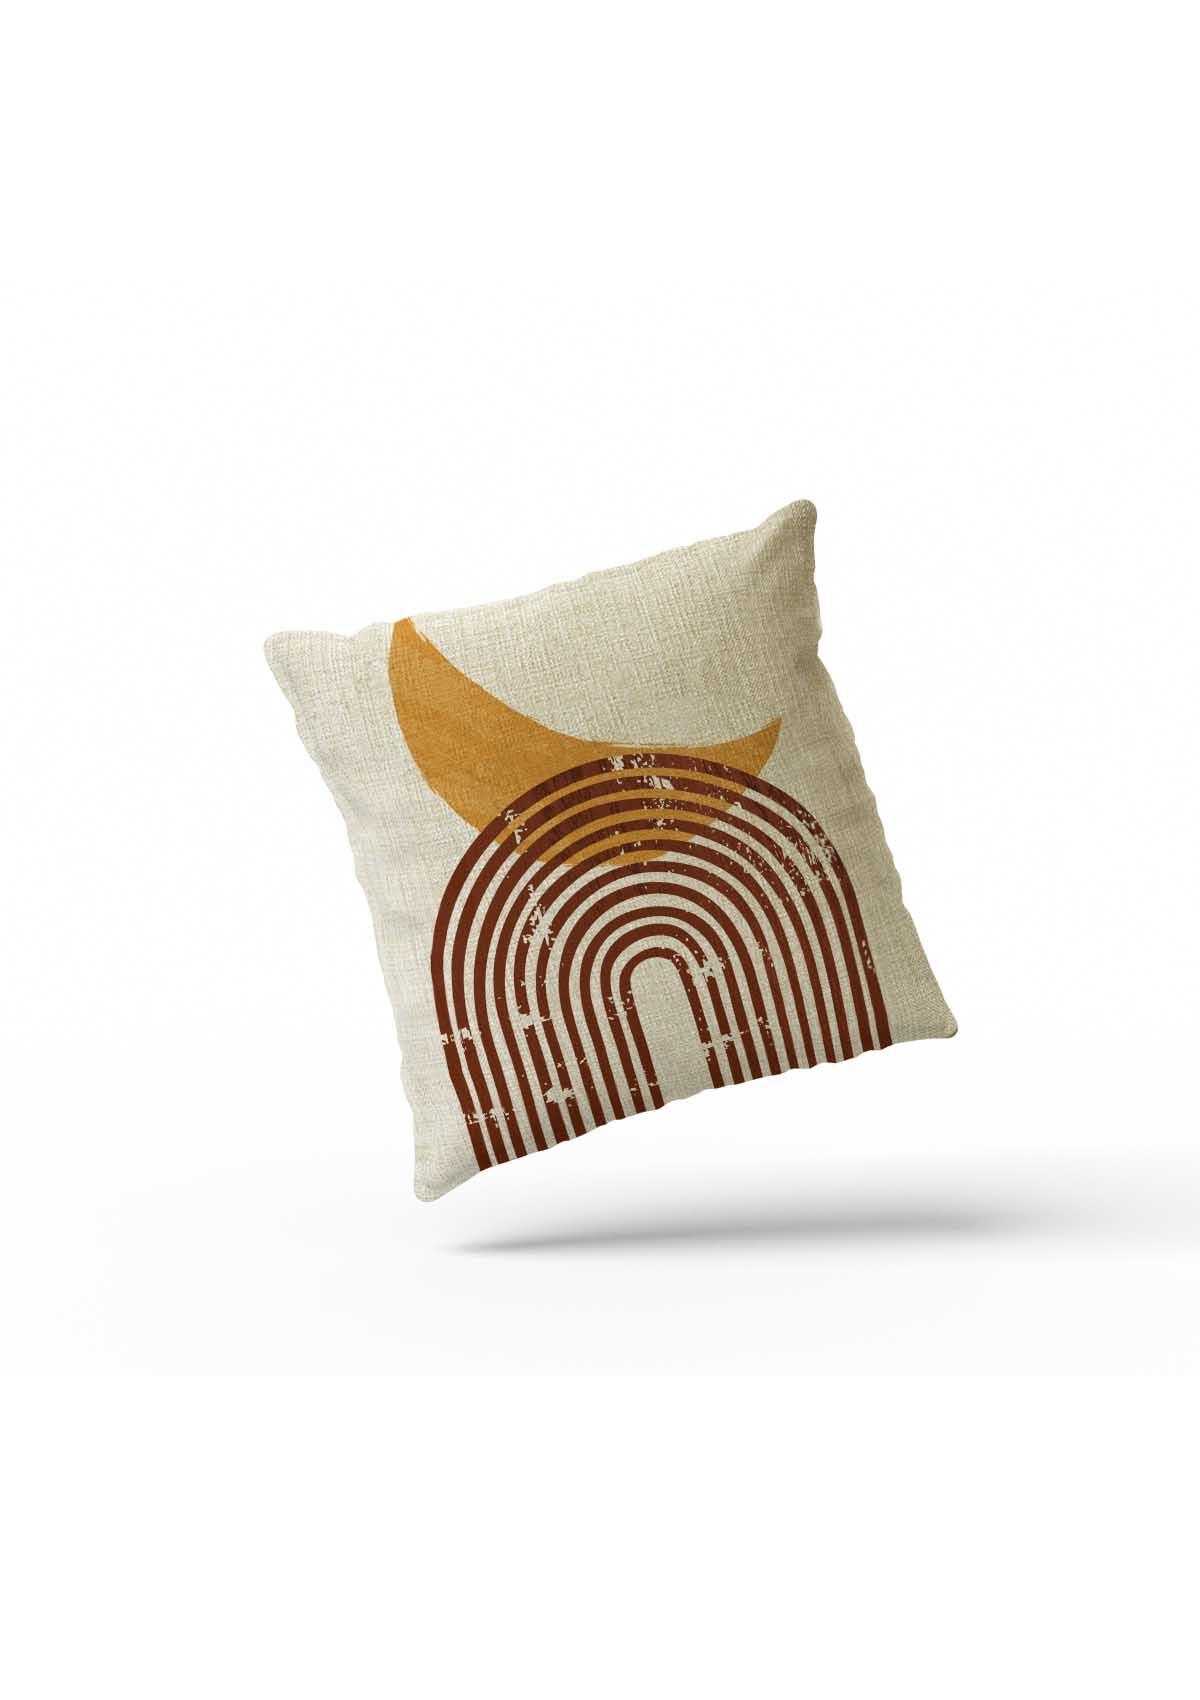 Abstract Art Cushion Cover